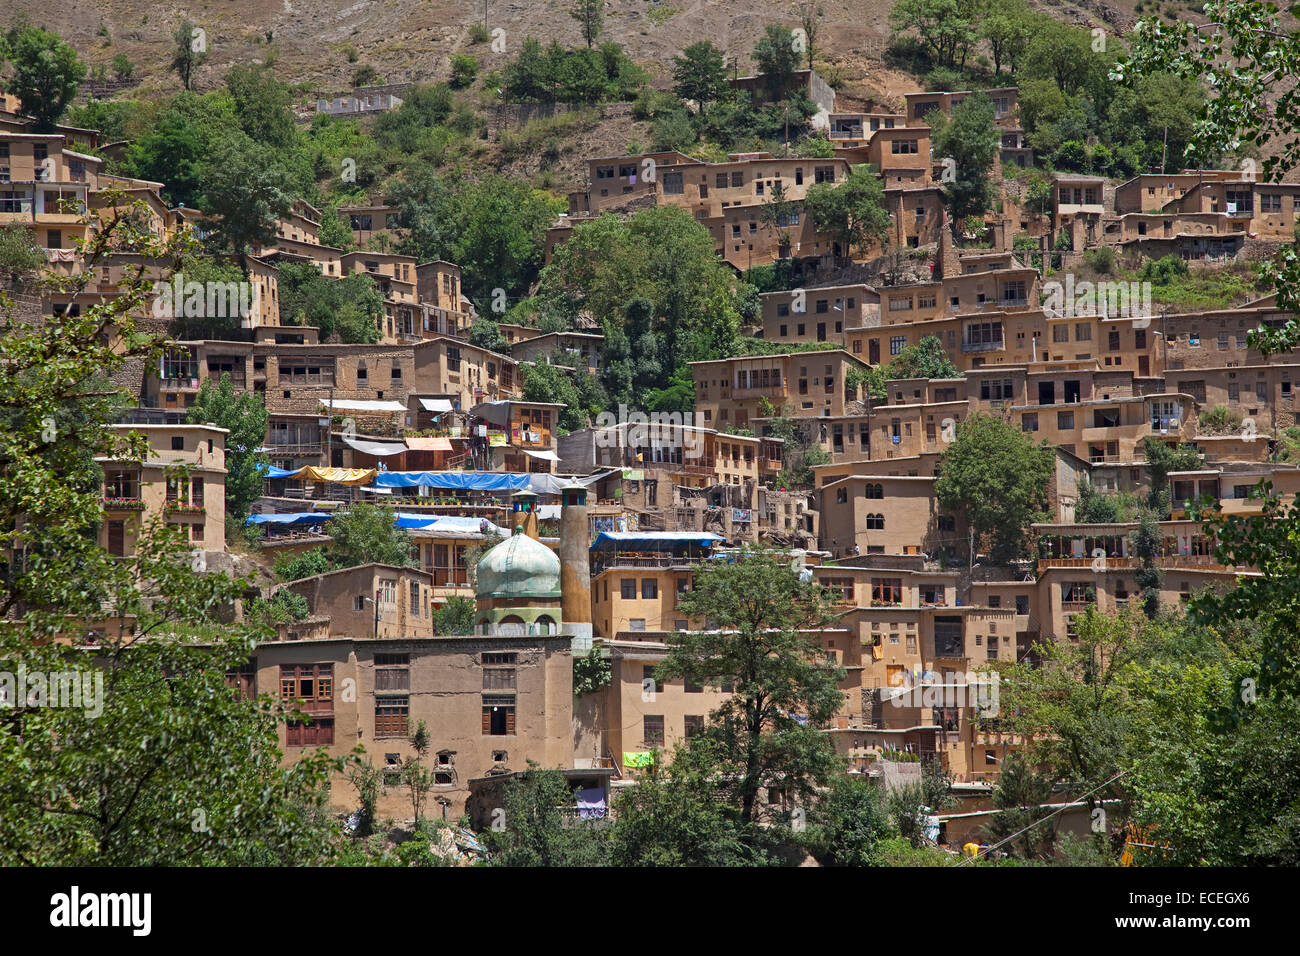 Interconnected houses made of adobe, rods and bole in terrace style in the village Masuleh / Massulya, Gilan Province, Iran Stock Photo